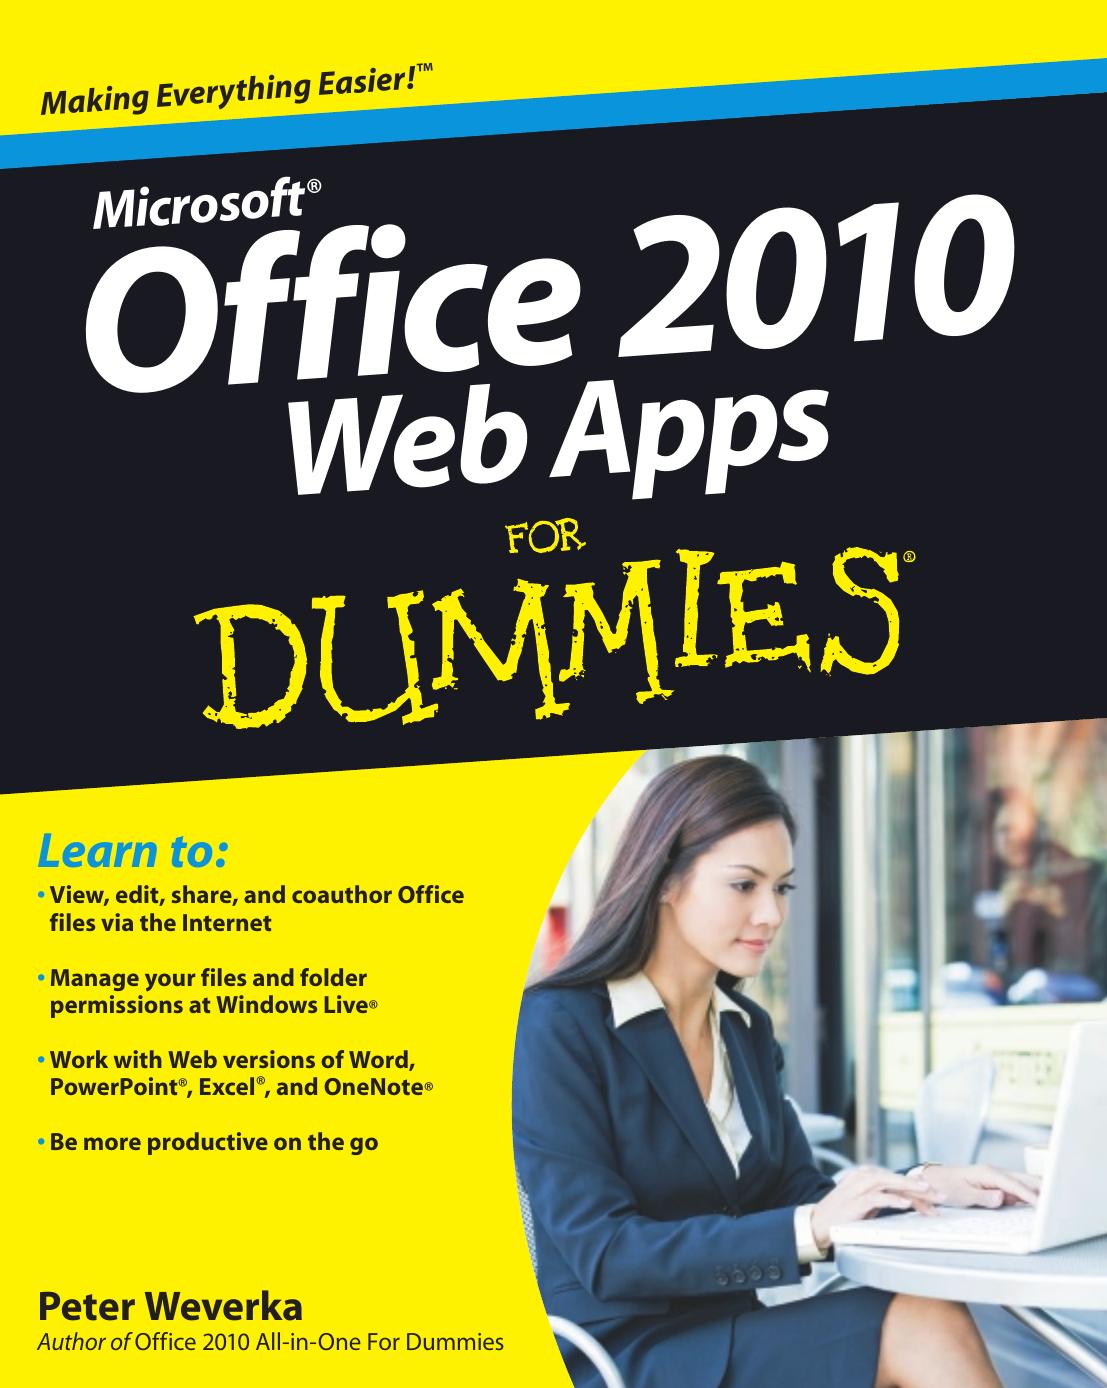 Office 2010 Web Apps for Dummies